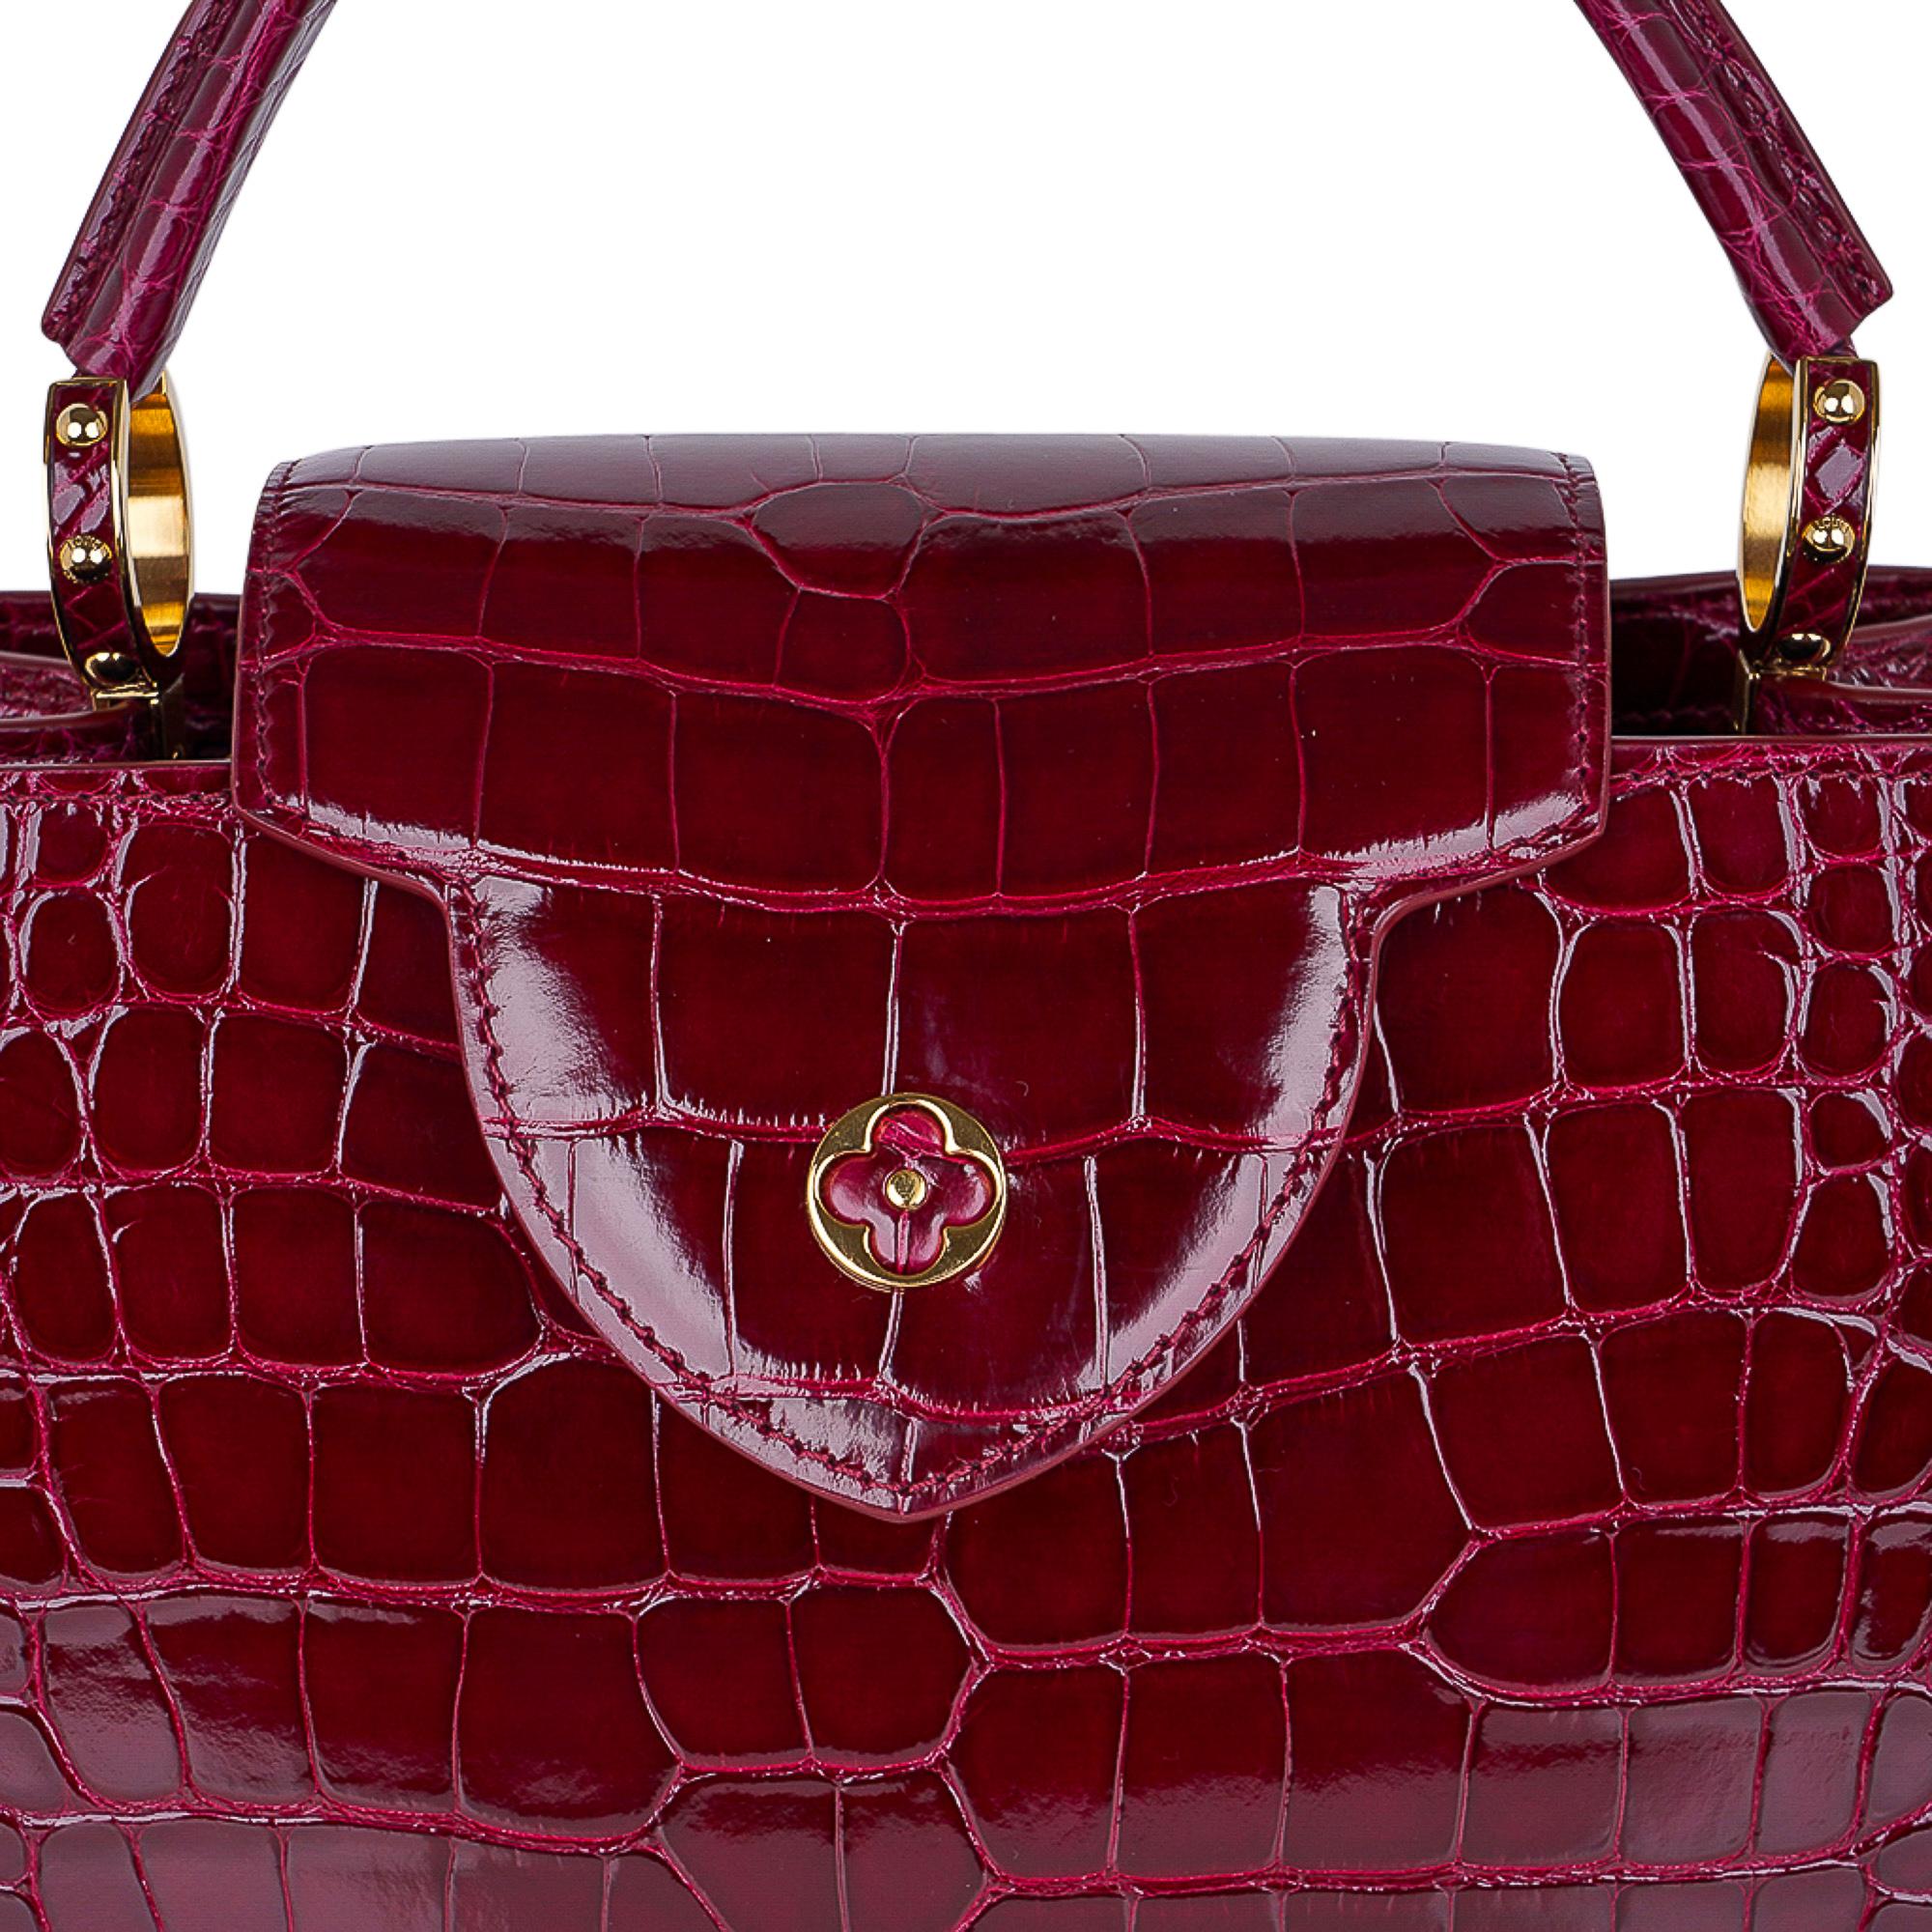 Guaranteed authentic limited edition special order Louis Vuitton Capucines PM crocodile bag featured in rich jeweled toned Wildcat..
Exquisite and effortlessly sleek, this Louis Vuitton bag is considered a classic.
Handles secured by jewel-like